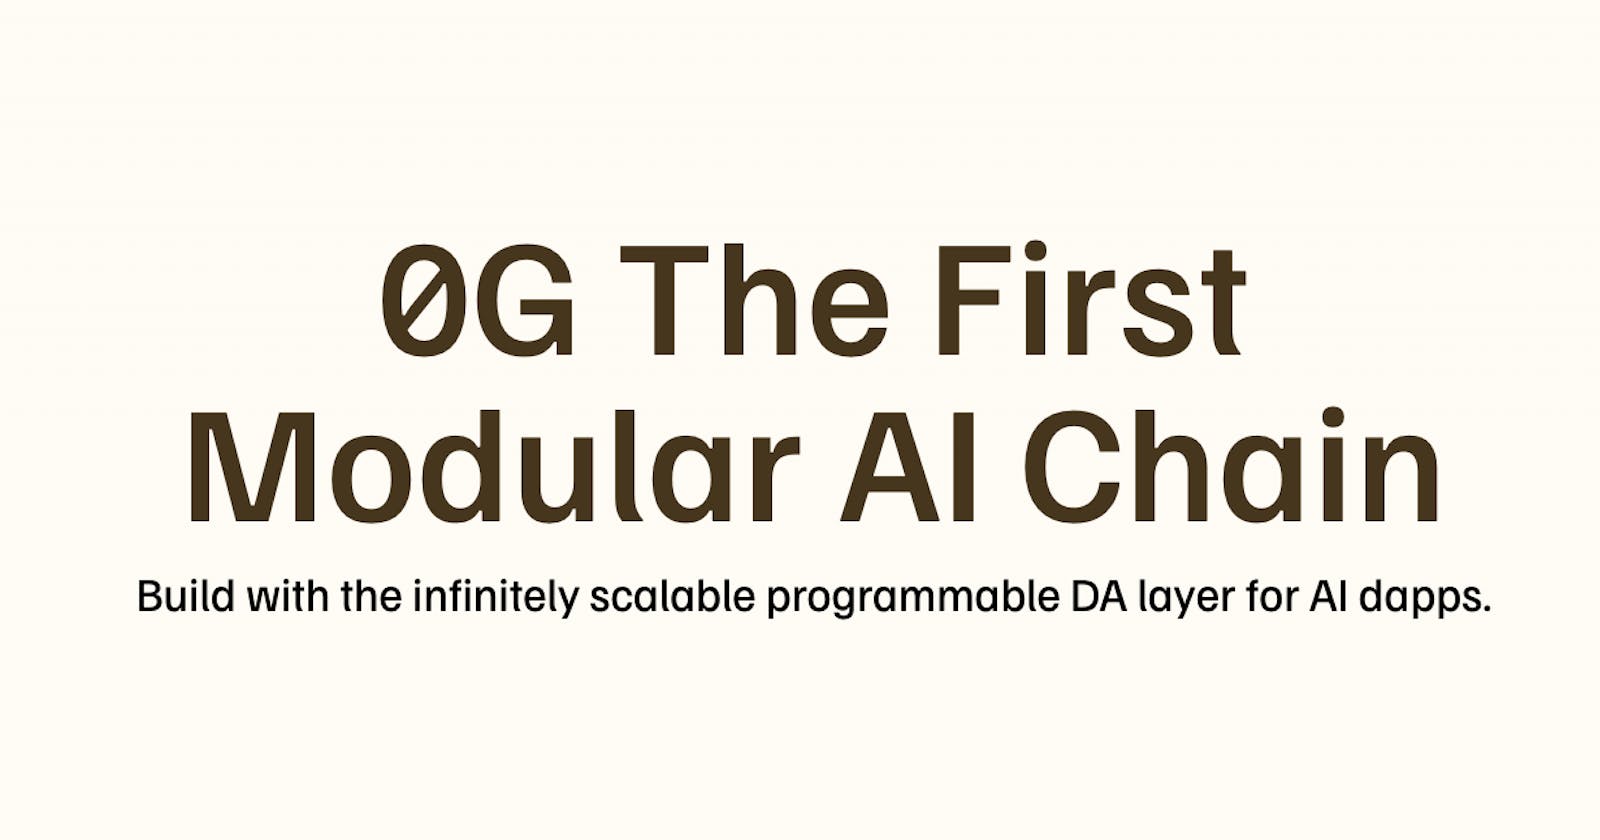 Unleashing the Power of AI on the Blockchain with 0G